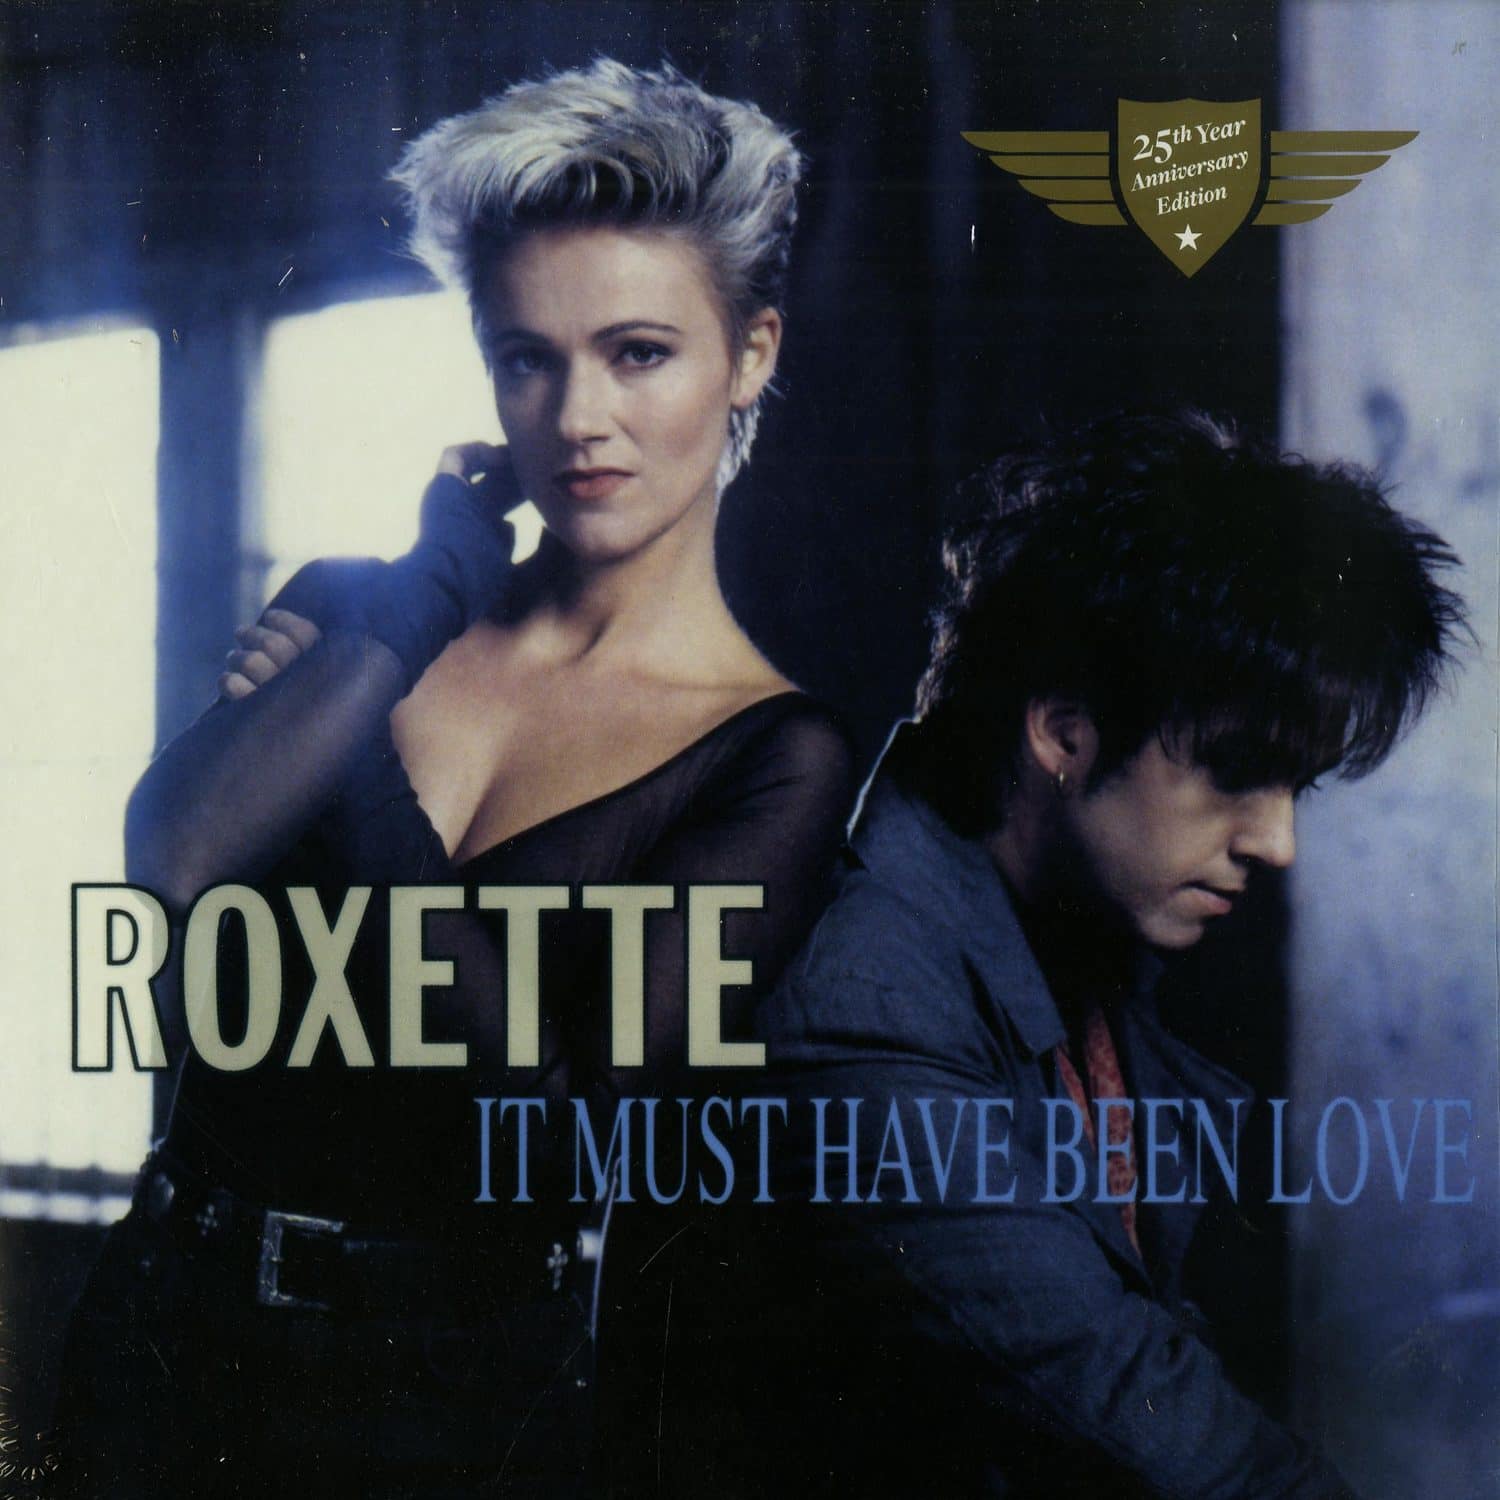 Roxette - IT MUST HAVE BEEN LOVE 